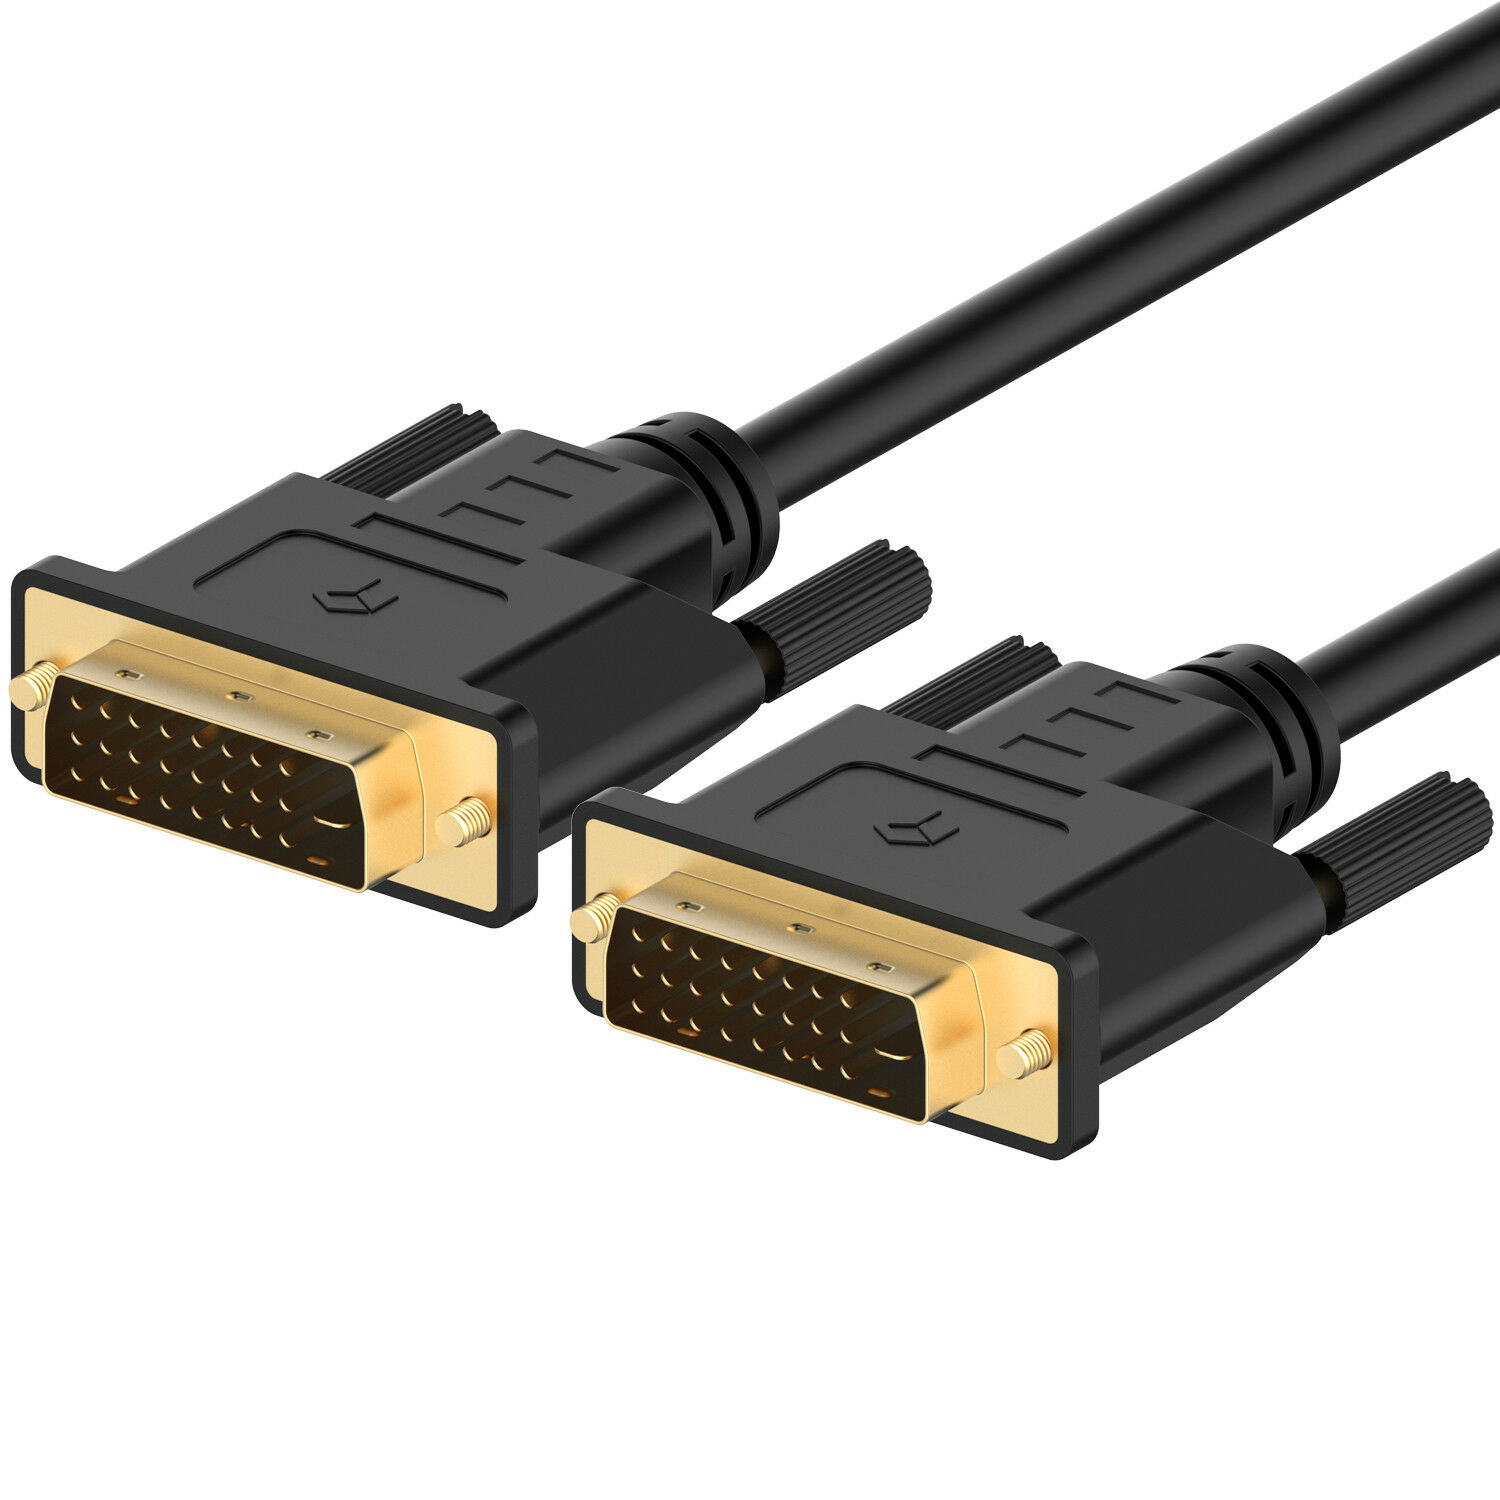 Rankie Dvi To Dvi Cable Gold Plated Monitor Cable Adapters 6 Feet Black